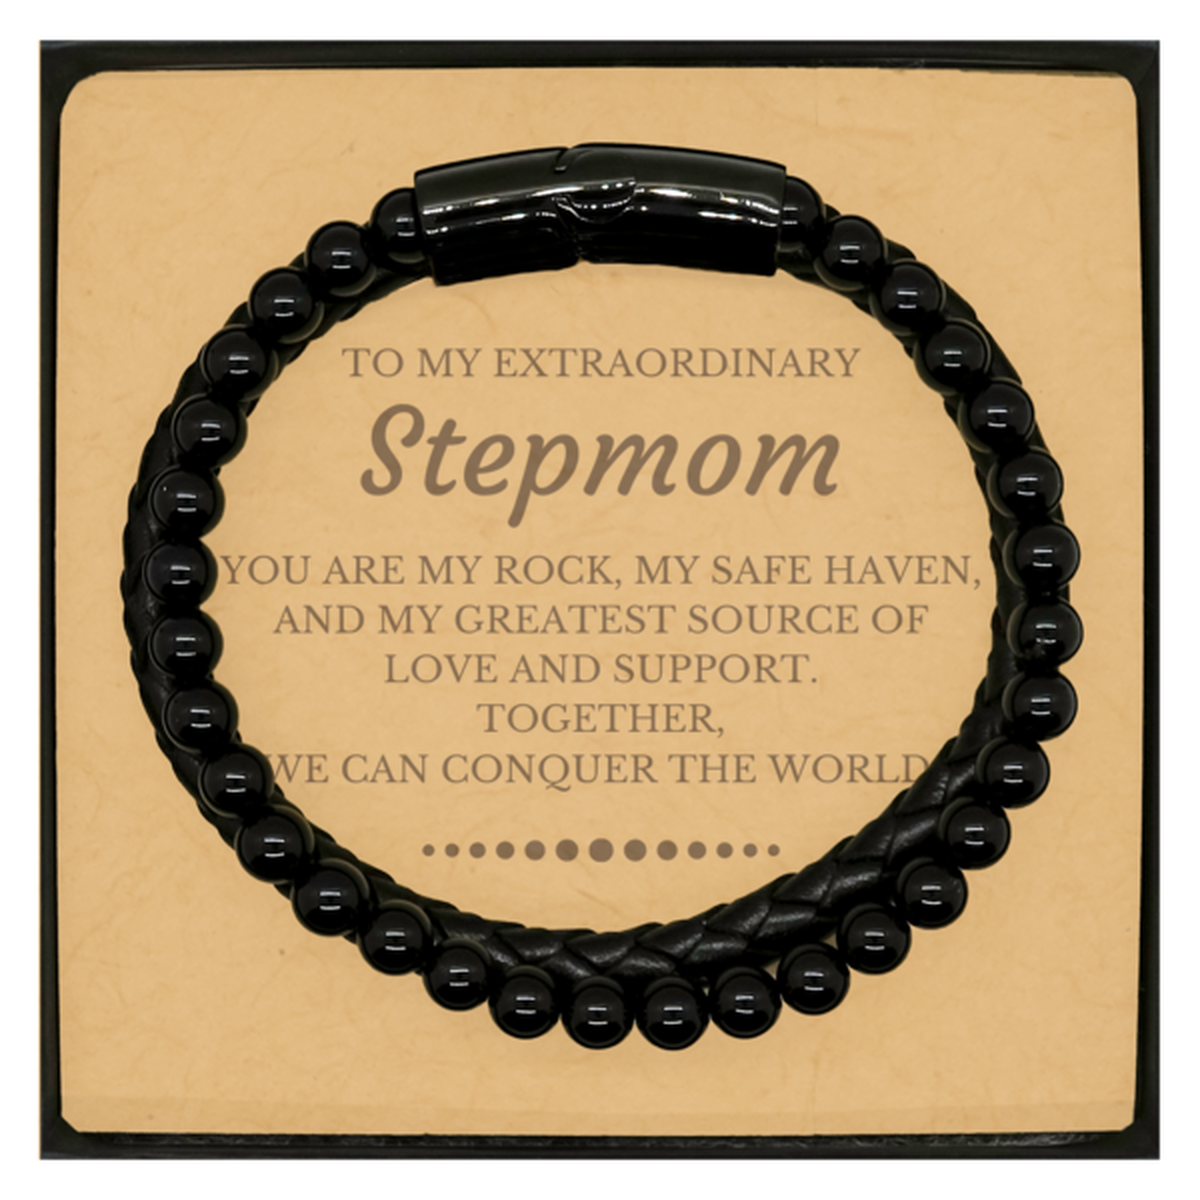 To My Extraordinary Stepmom Gifts, Together, we can conquer the world, Birthday Christmas Stone Leather Bracelets For Stepmom, Christmas Gifts For Stepmom